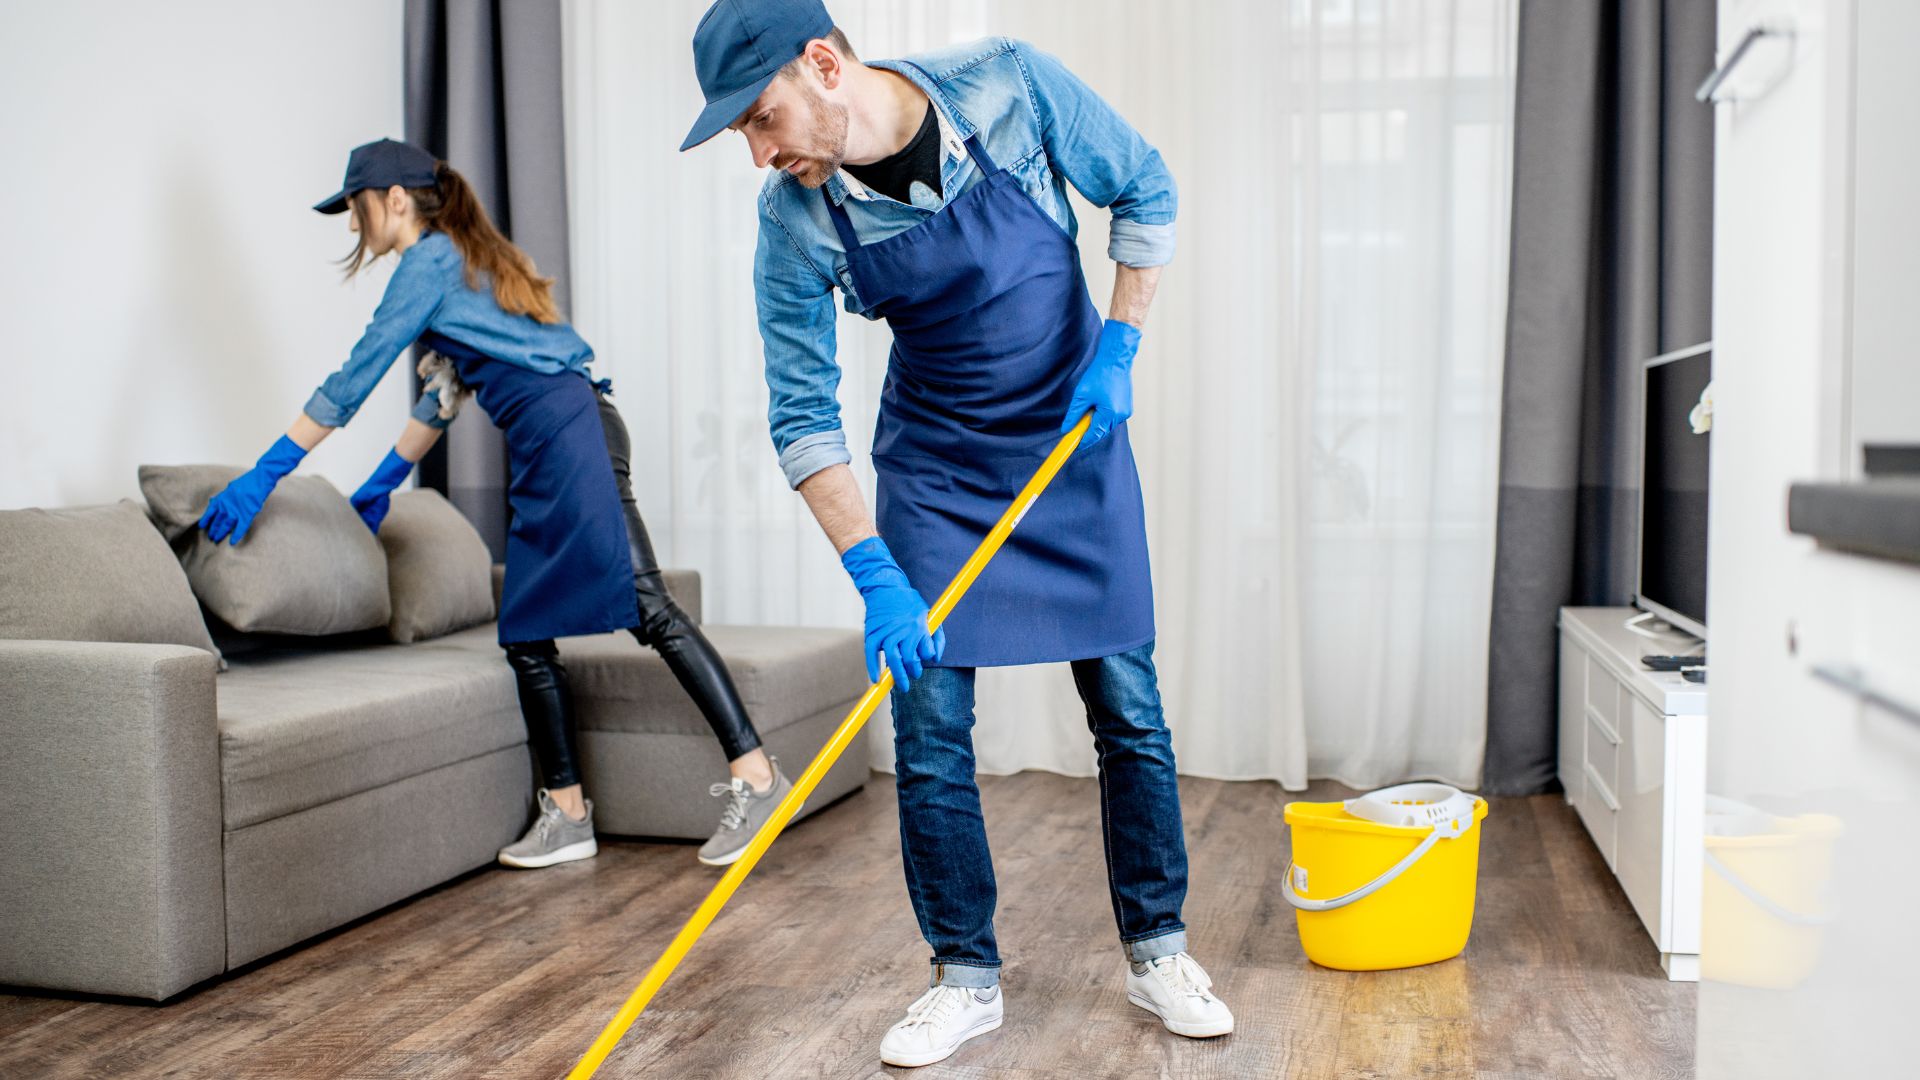 Housekeeping Services Business Plan in Tamil